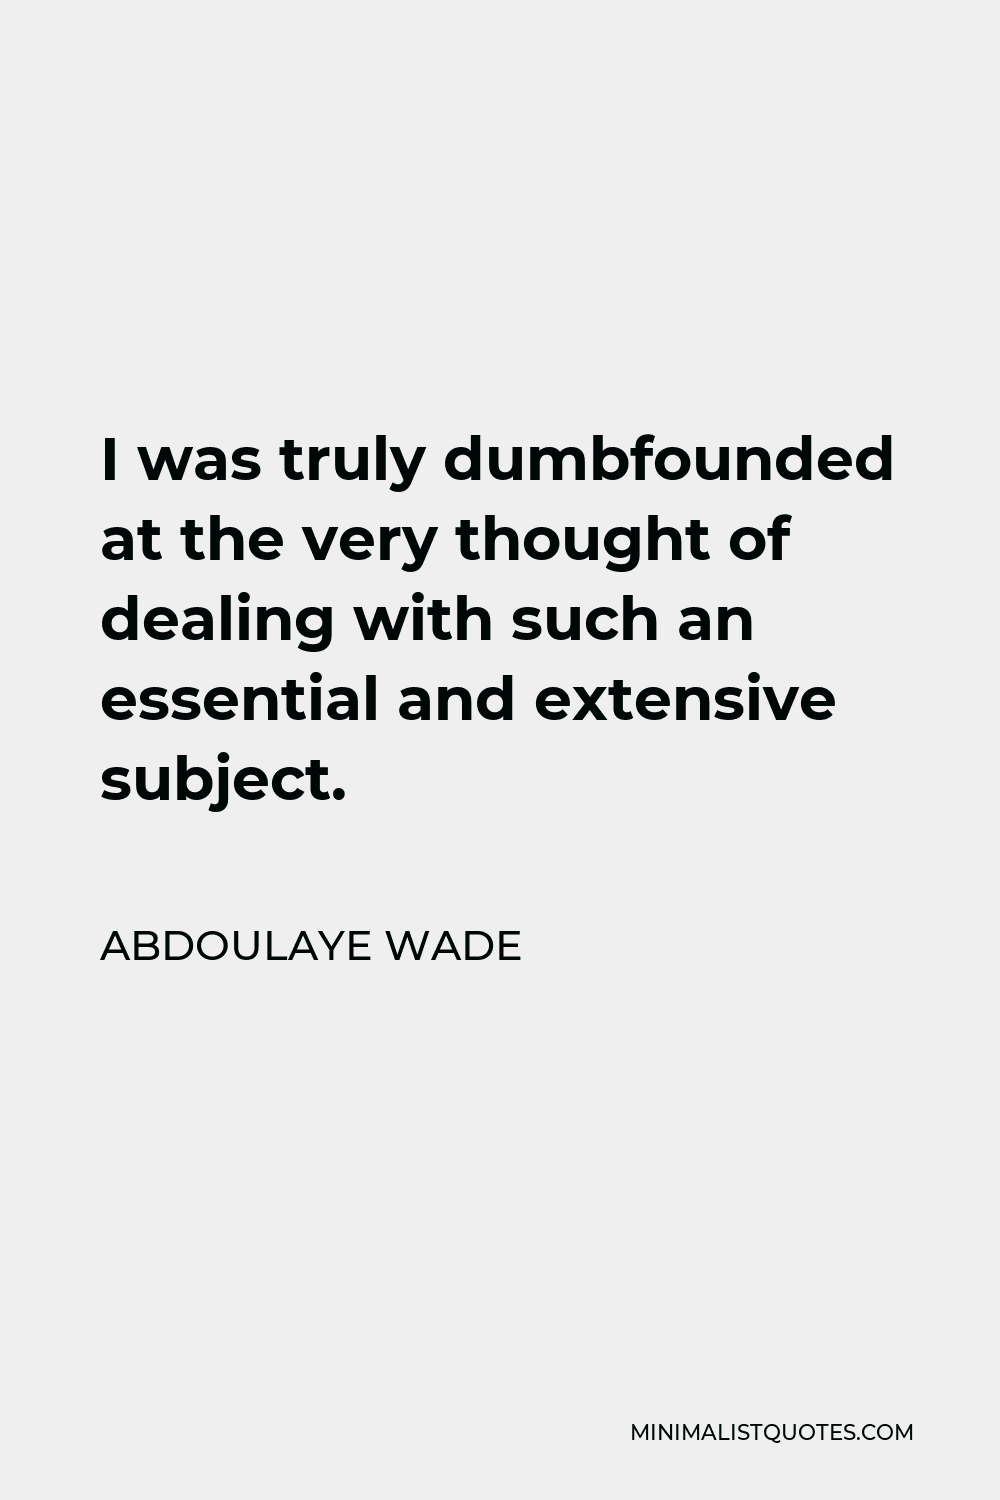 Abdoulaye Wade Quote - I was truly dumbfounded at the very thought of dealing with such an essential and extensive subject.